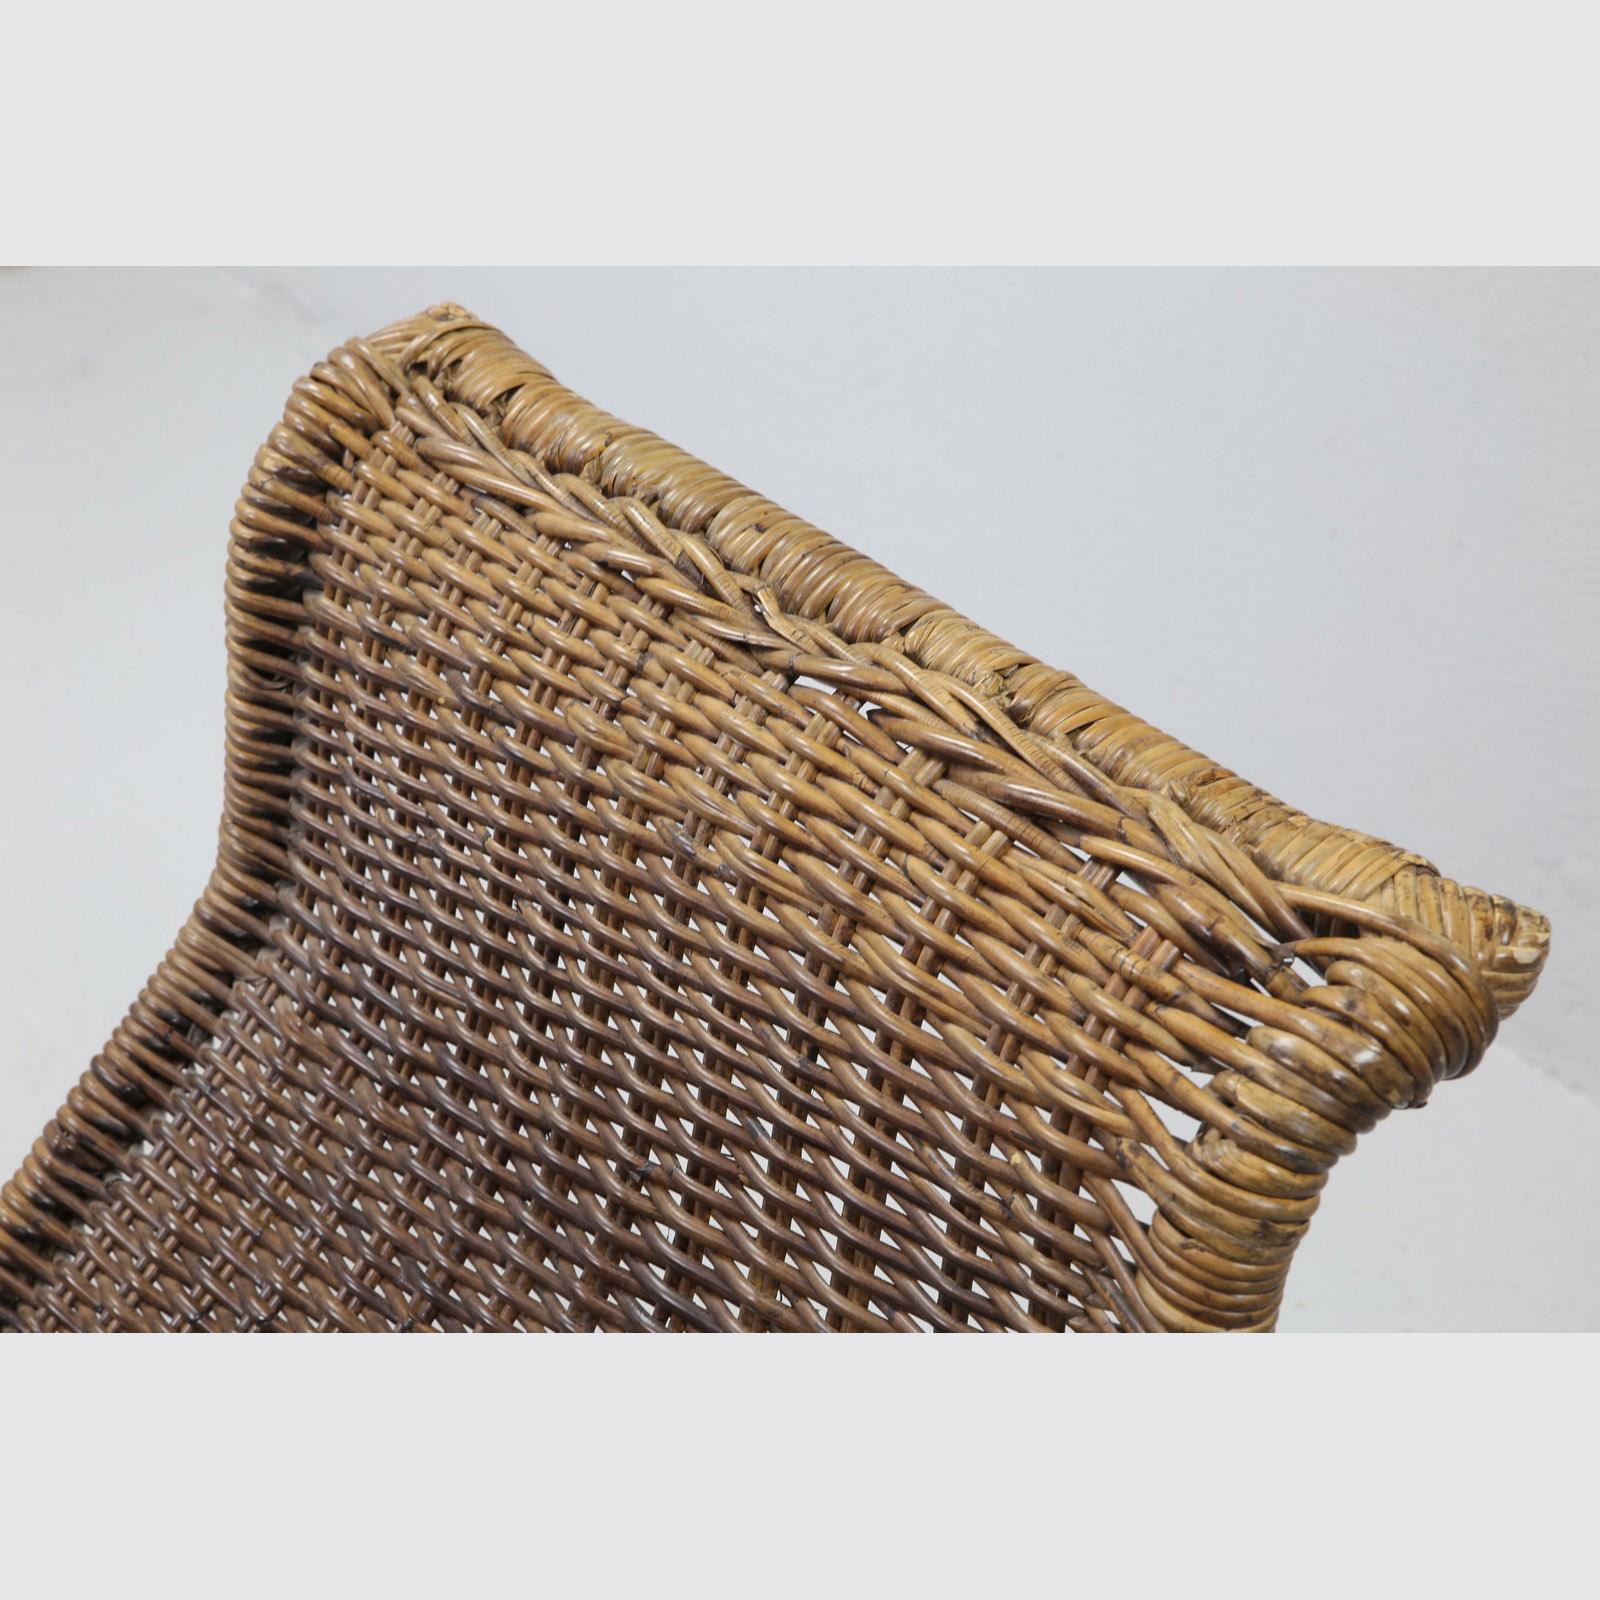 Mid-Century, Sculptural Italian Rattan and Bamboo Chaise Longue Lounge Chair For Sale 6